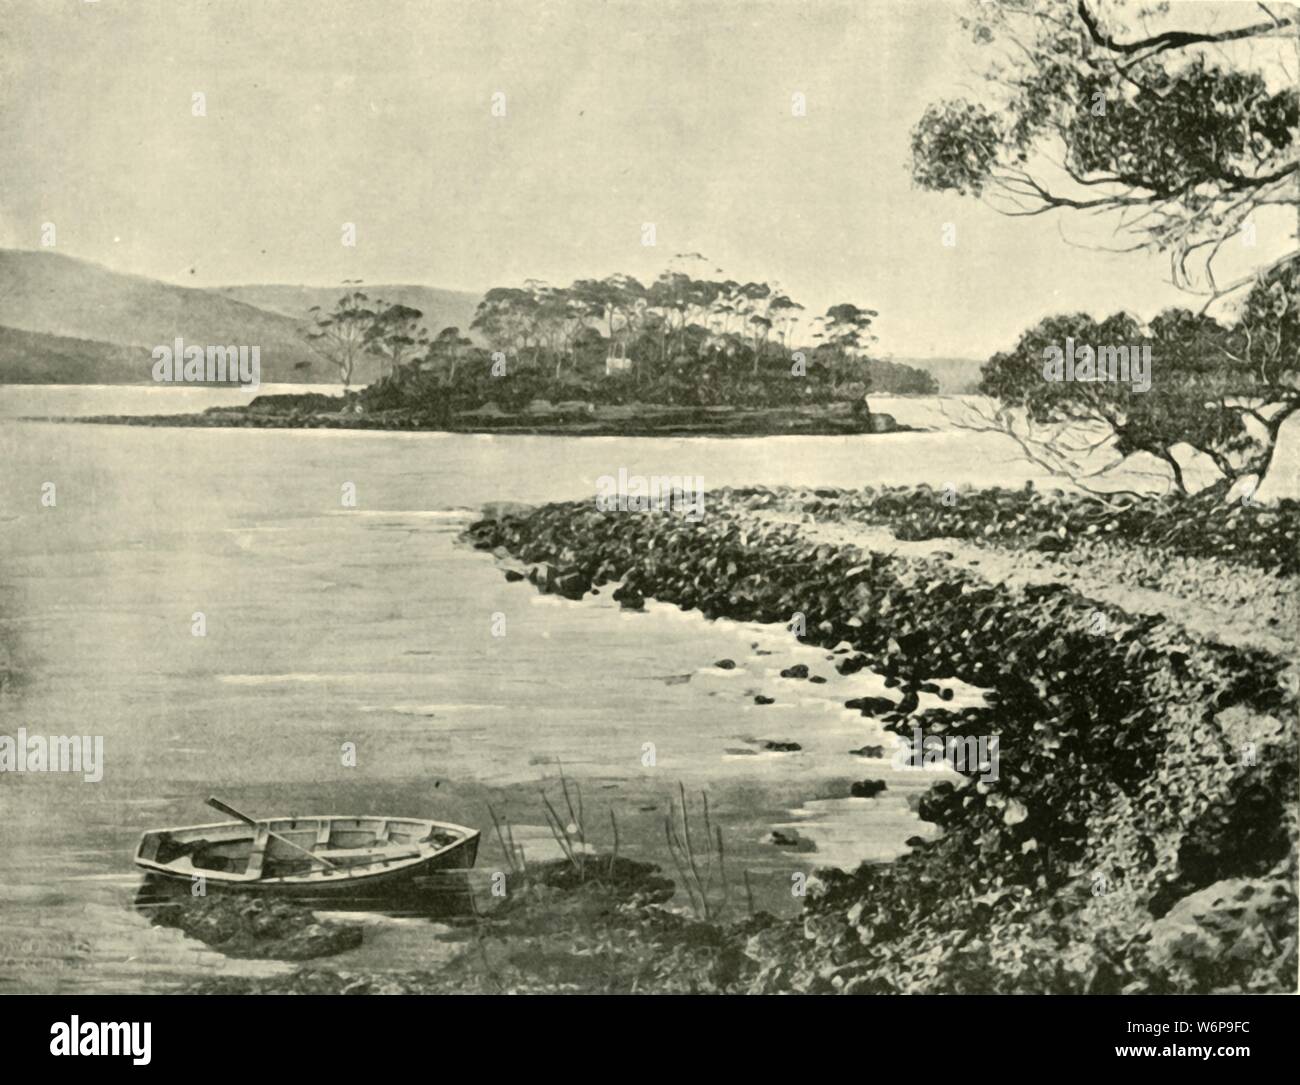 'Isle of the Dead, Port Arthur', 1901. Isle of the Dead, a cemetery for all who died in the prison camps at Port Arthur when it was a British penal colony between 1833 and 1877. From &quot;Federated Australia&quot;. [The Werner Company, London, 1901] Stock Photo